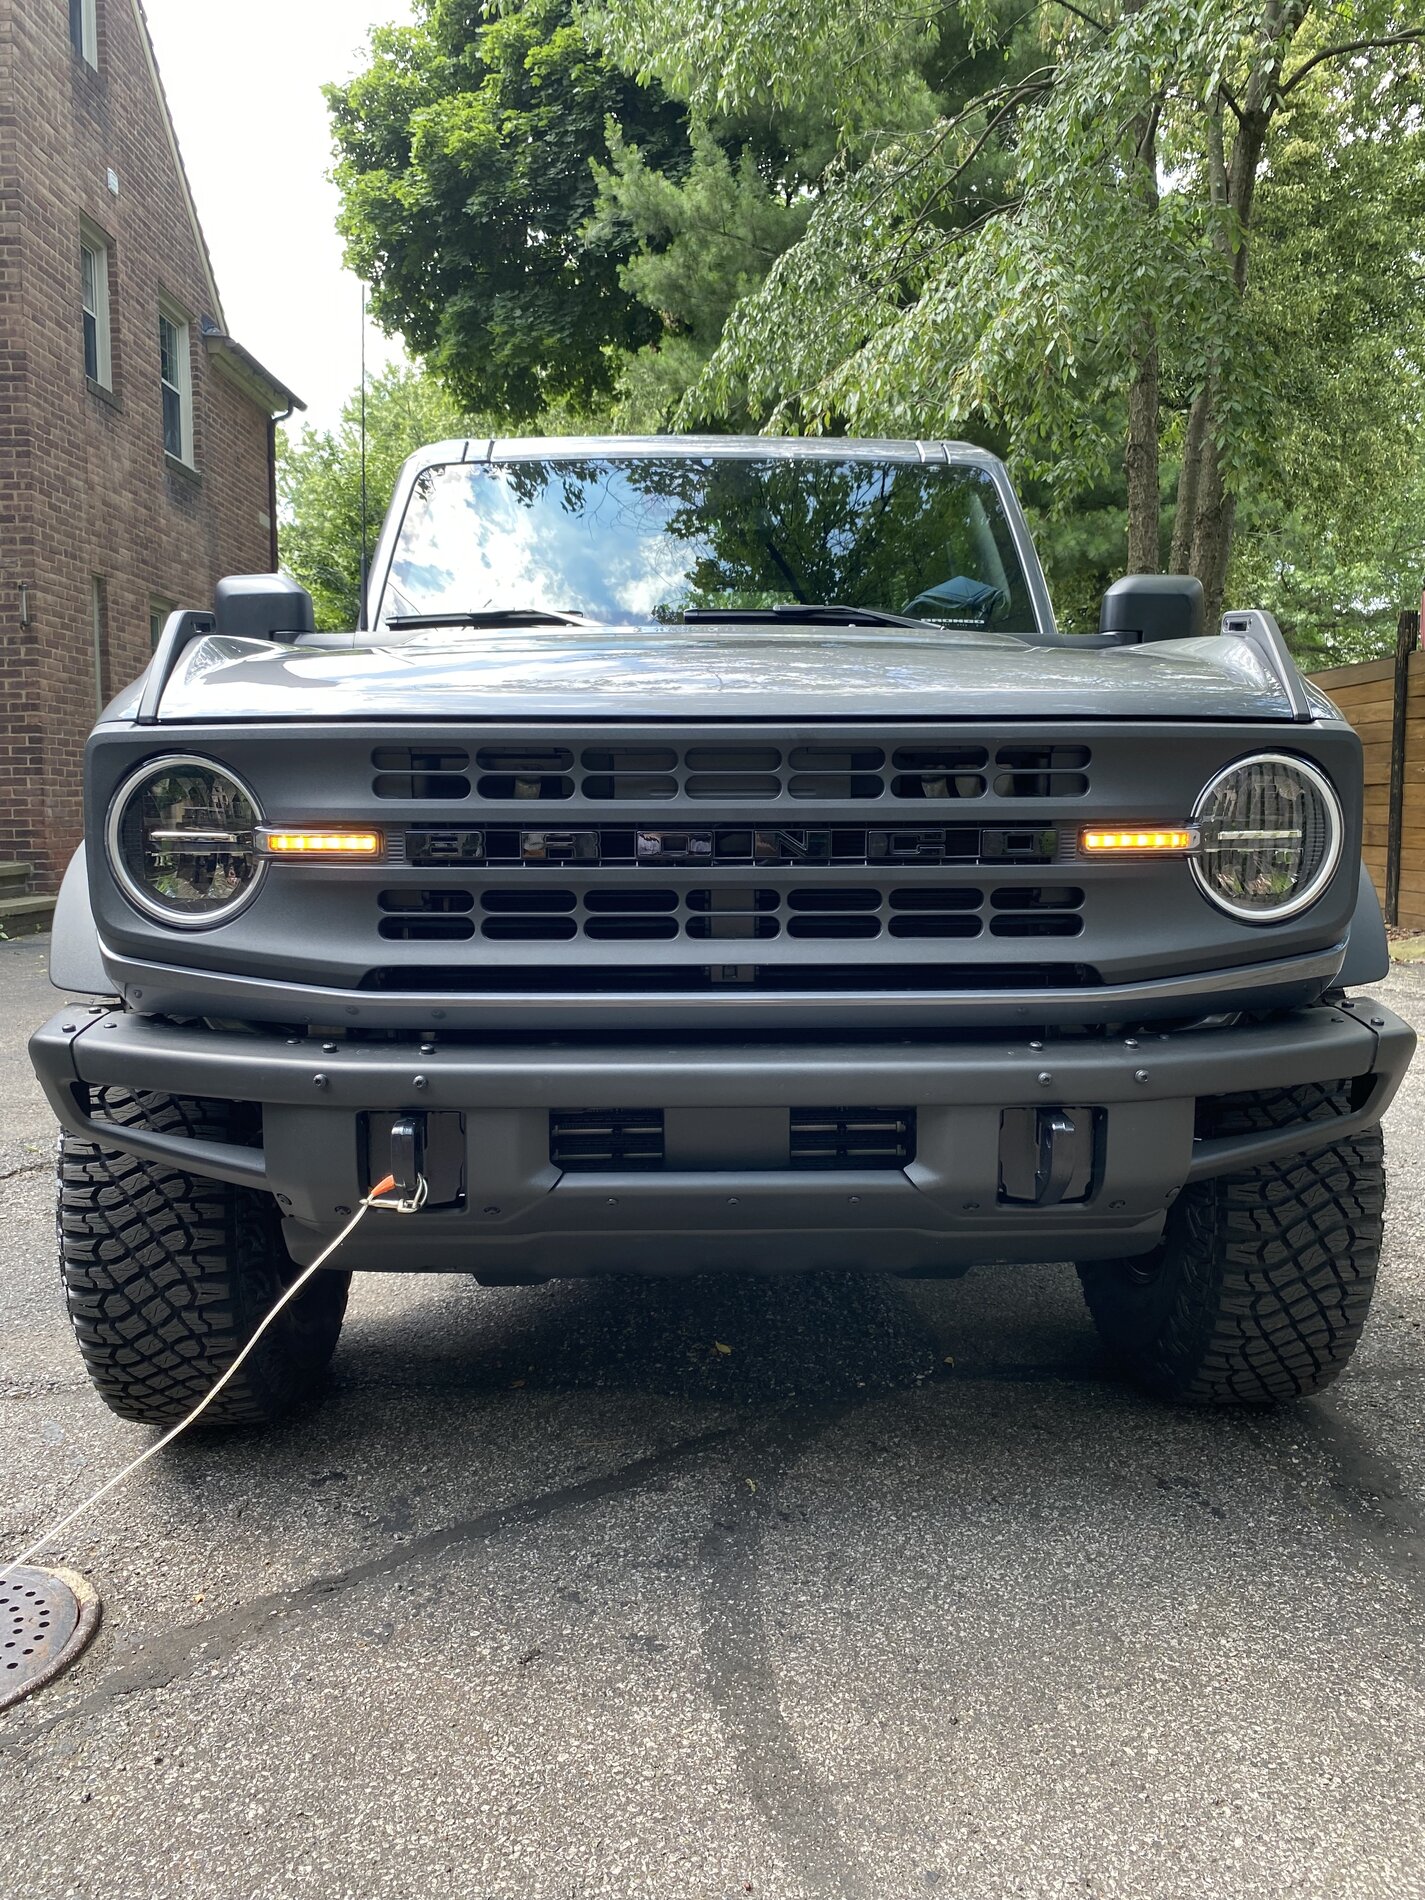 Ford Bronco BaseSquatch DELIVERED : 2 Door Base Sasquatch [UPDATE - NOW WITH MORE PICTURES & REVIEW] BC401DDC-8E56-459B-8146-4DF61E58AD7A